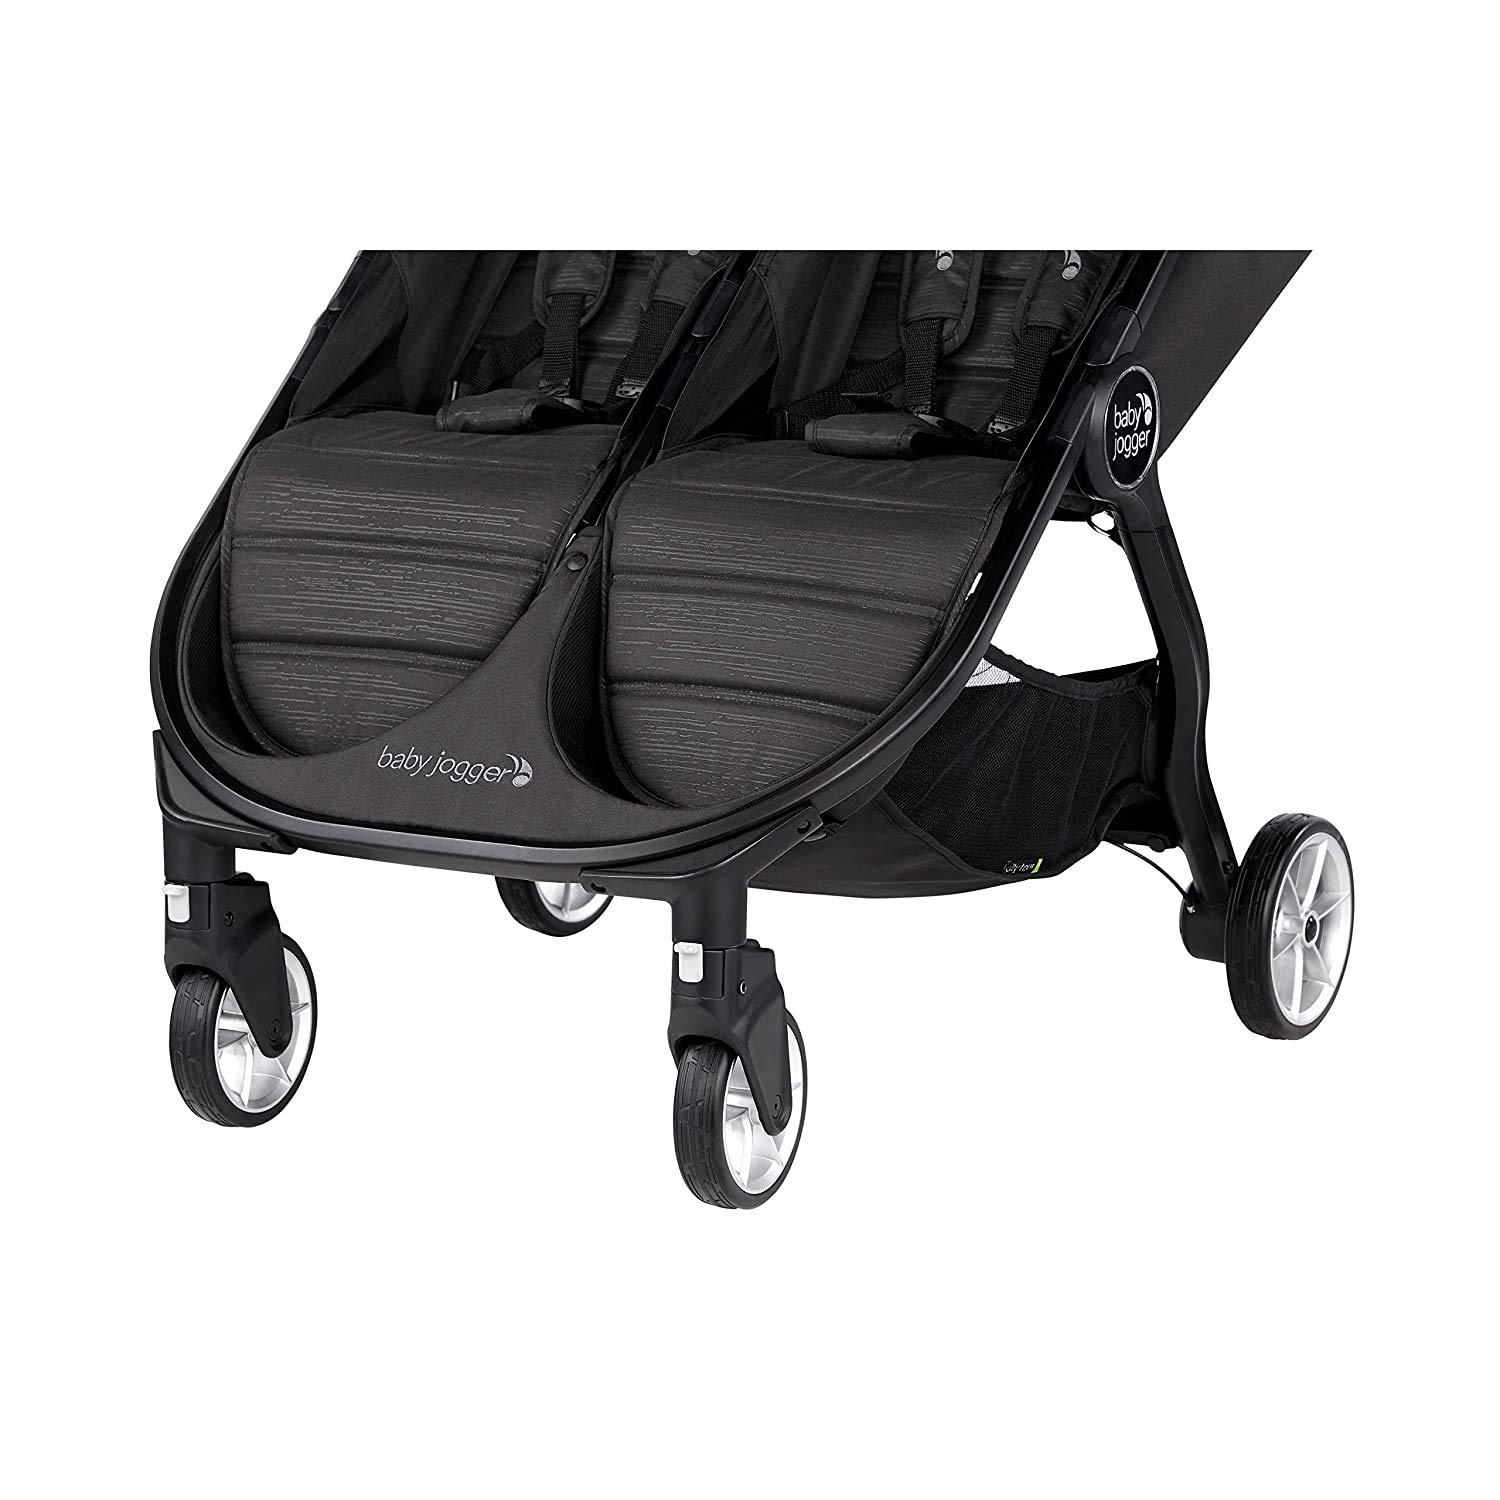 Baby Jogger City Tour 2 Double Stroller - Baby Jogger City Tour 2 Double Stroller Review 1